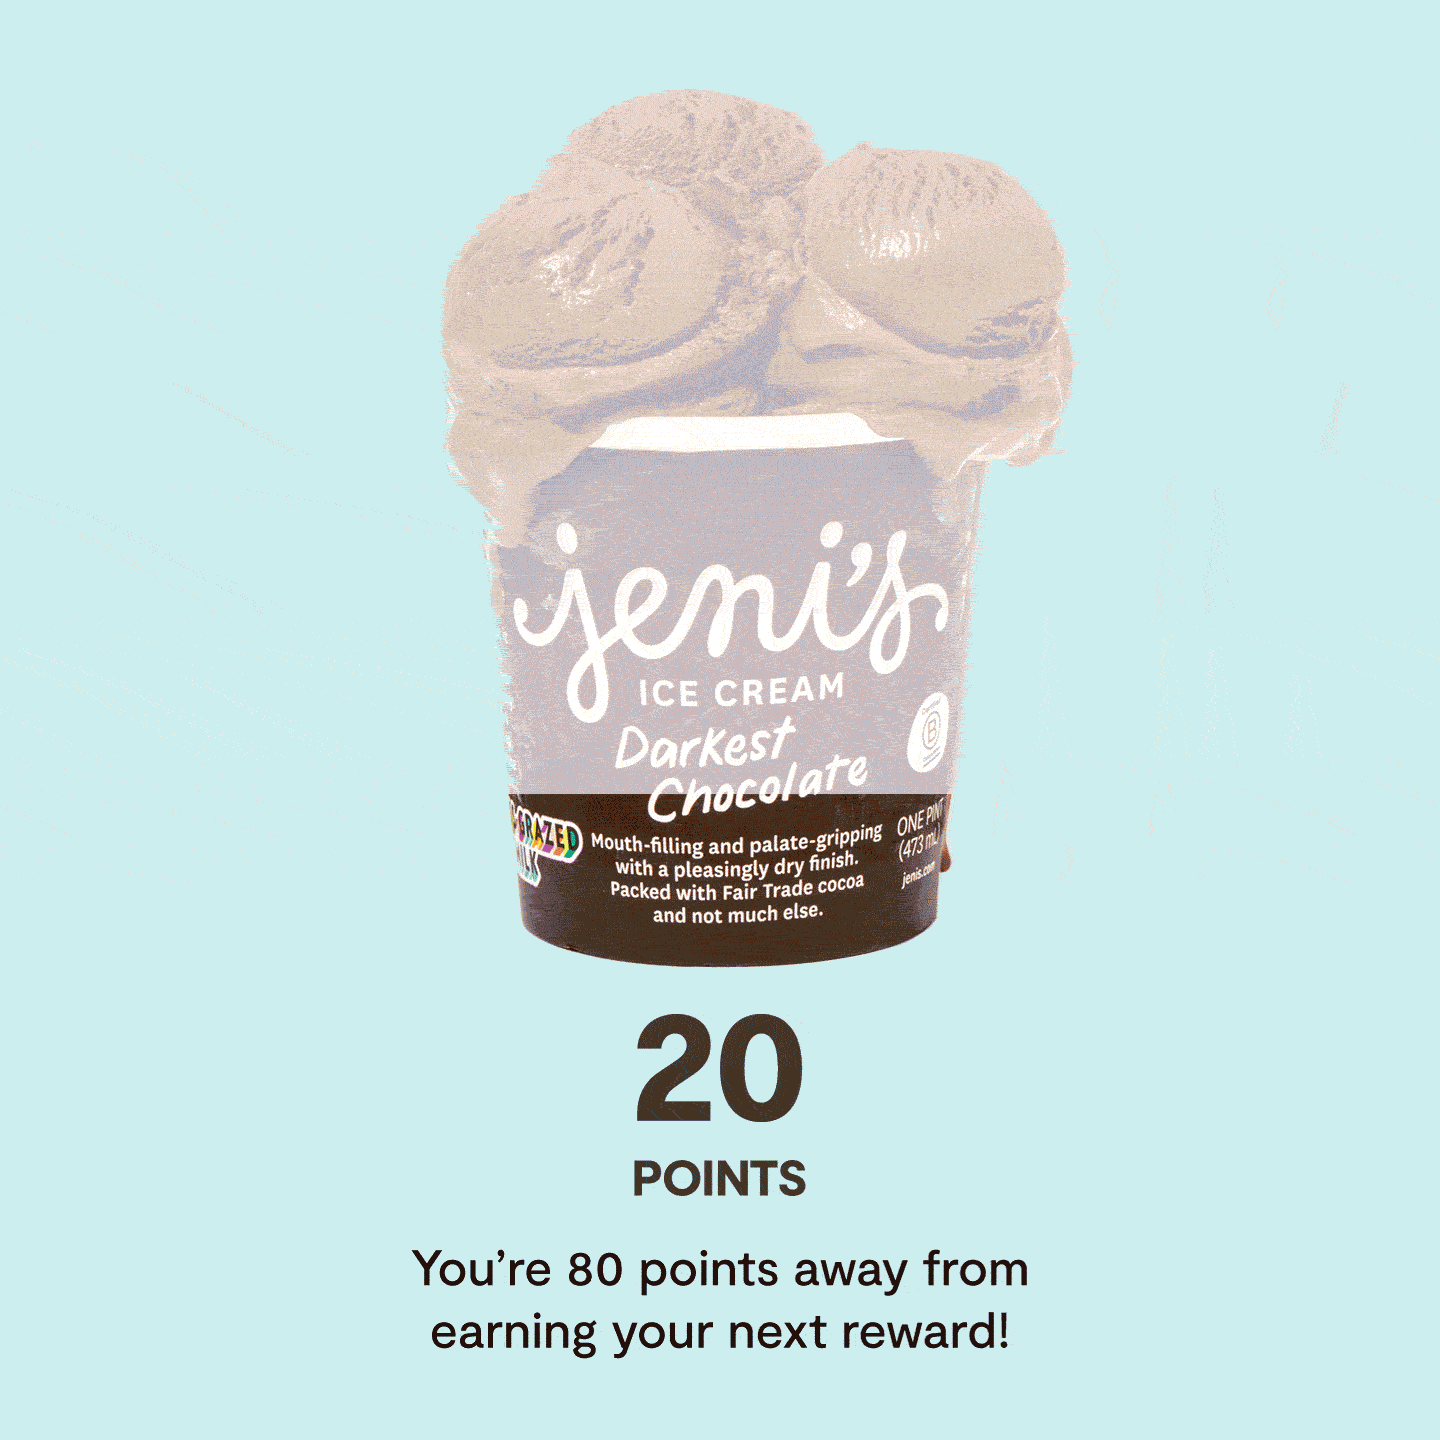 Animation of a pint of ice cream filling up and rewards points moving from 20 to 100 points